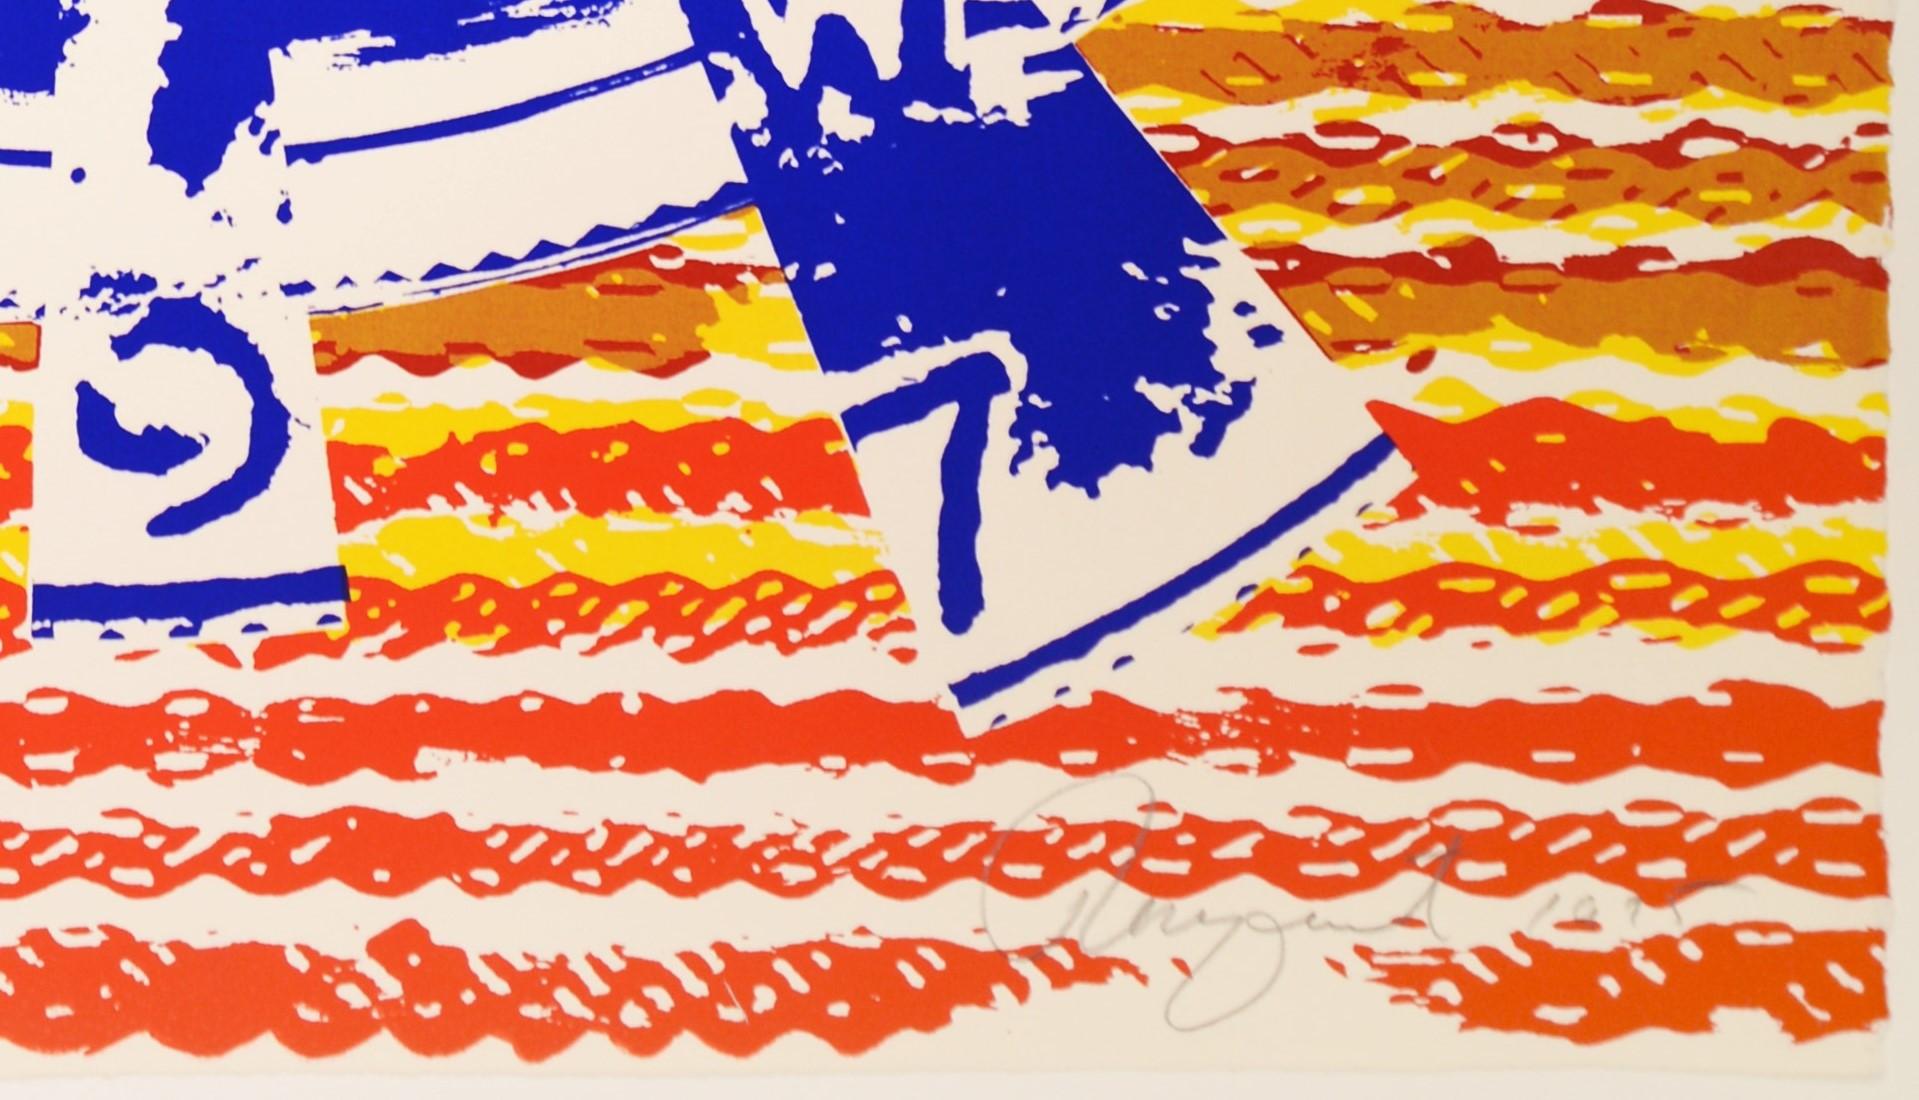 Miles from America - Pop Art Print by James Rosenquist